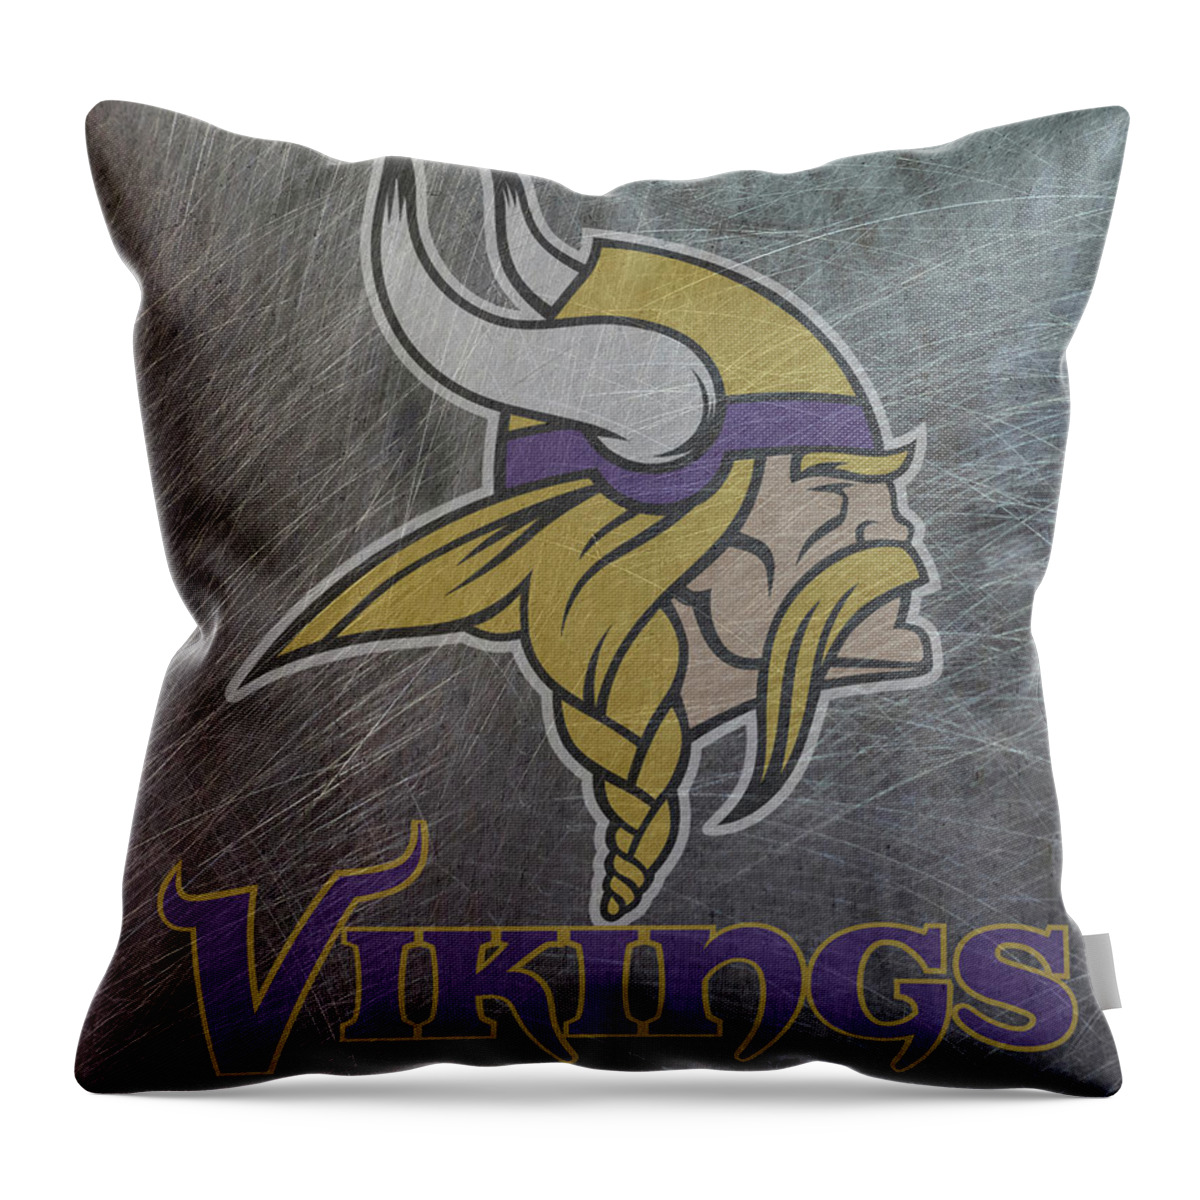 Minnesota Throw Pillow featuring the mixed media Minnesota Vikings Translucent Steel by Movie Poster Prints